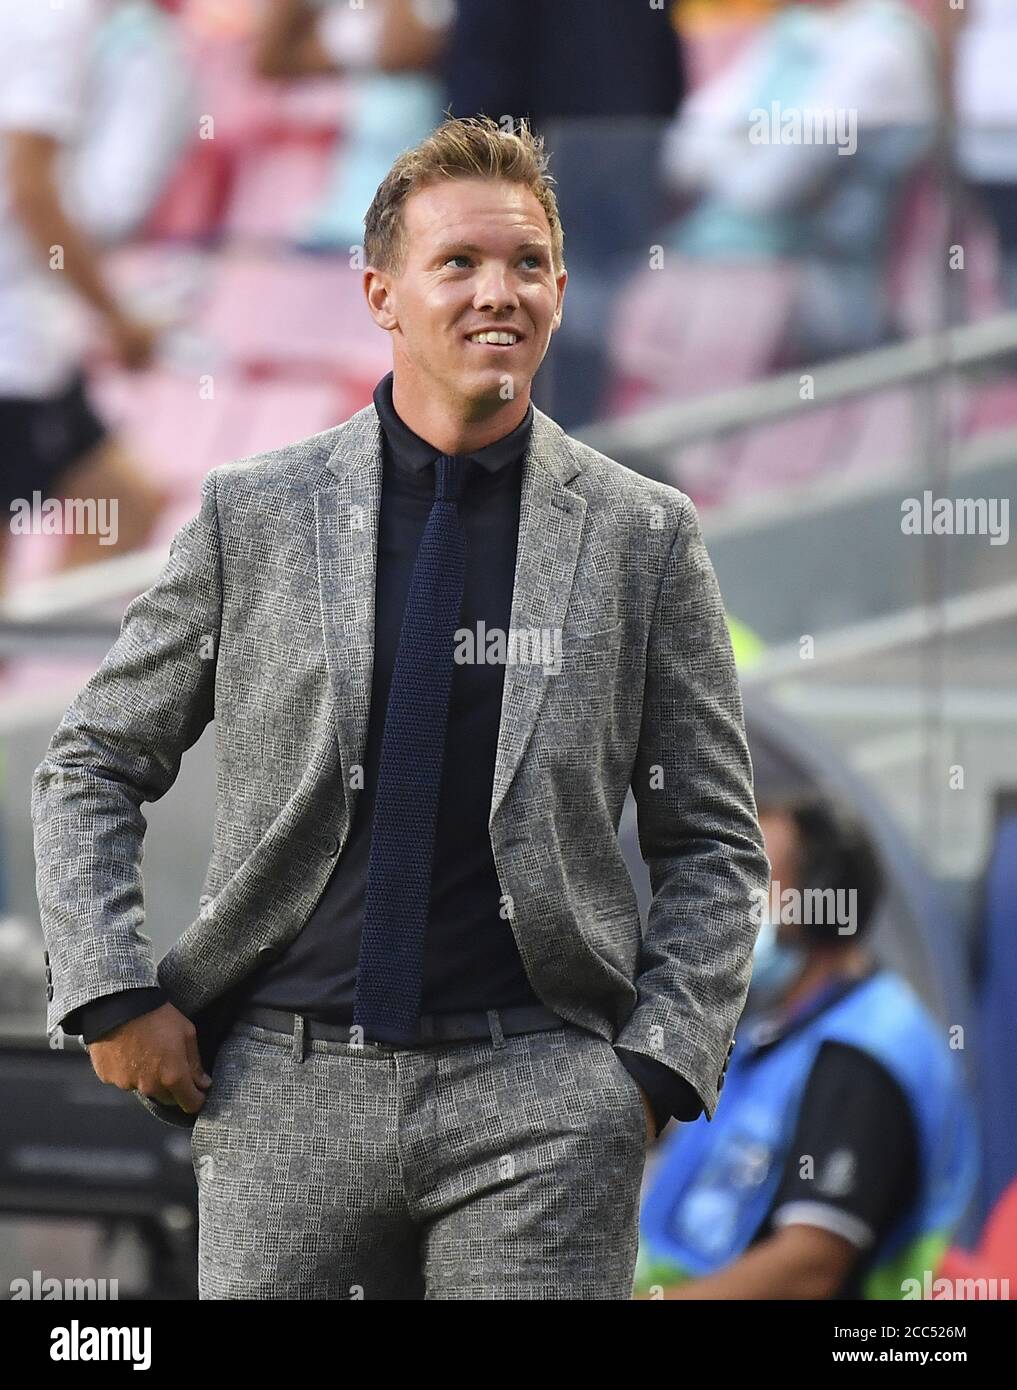 Lisbon, Lissabon, Portugal, 18th August 2020.  Julian NAGELSMANN, RB Leipzig team manager, coach,   in  the semifinal match UEFA Champions League, final tournament RB LEIPZIG - PARIS SG in season 2019/2020,  Photographer: © Peter Schatz / Alamy Live News / Frank Hoermann/ SVEN SIMON/ Pool    - UEFA REGULATIONS PROHIBIT ANY USE OF PHOTOGRAPHS as IMAGE SEQUENCES and/or QUASI-VIDEO -  National and international News-Agencies OUT Editorial Use ONLY Stock Photo